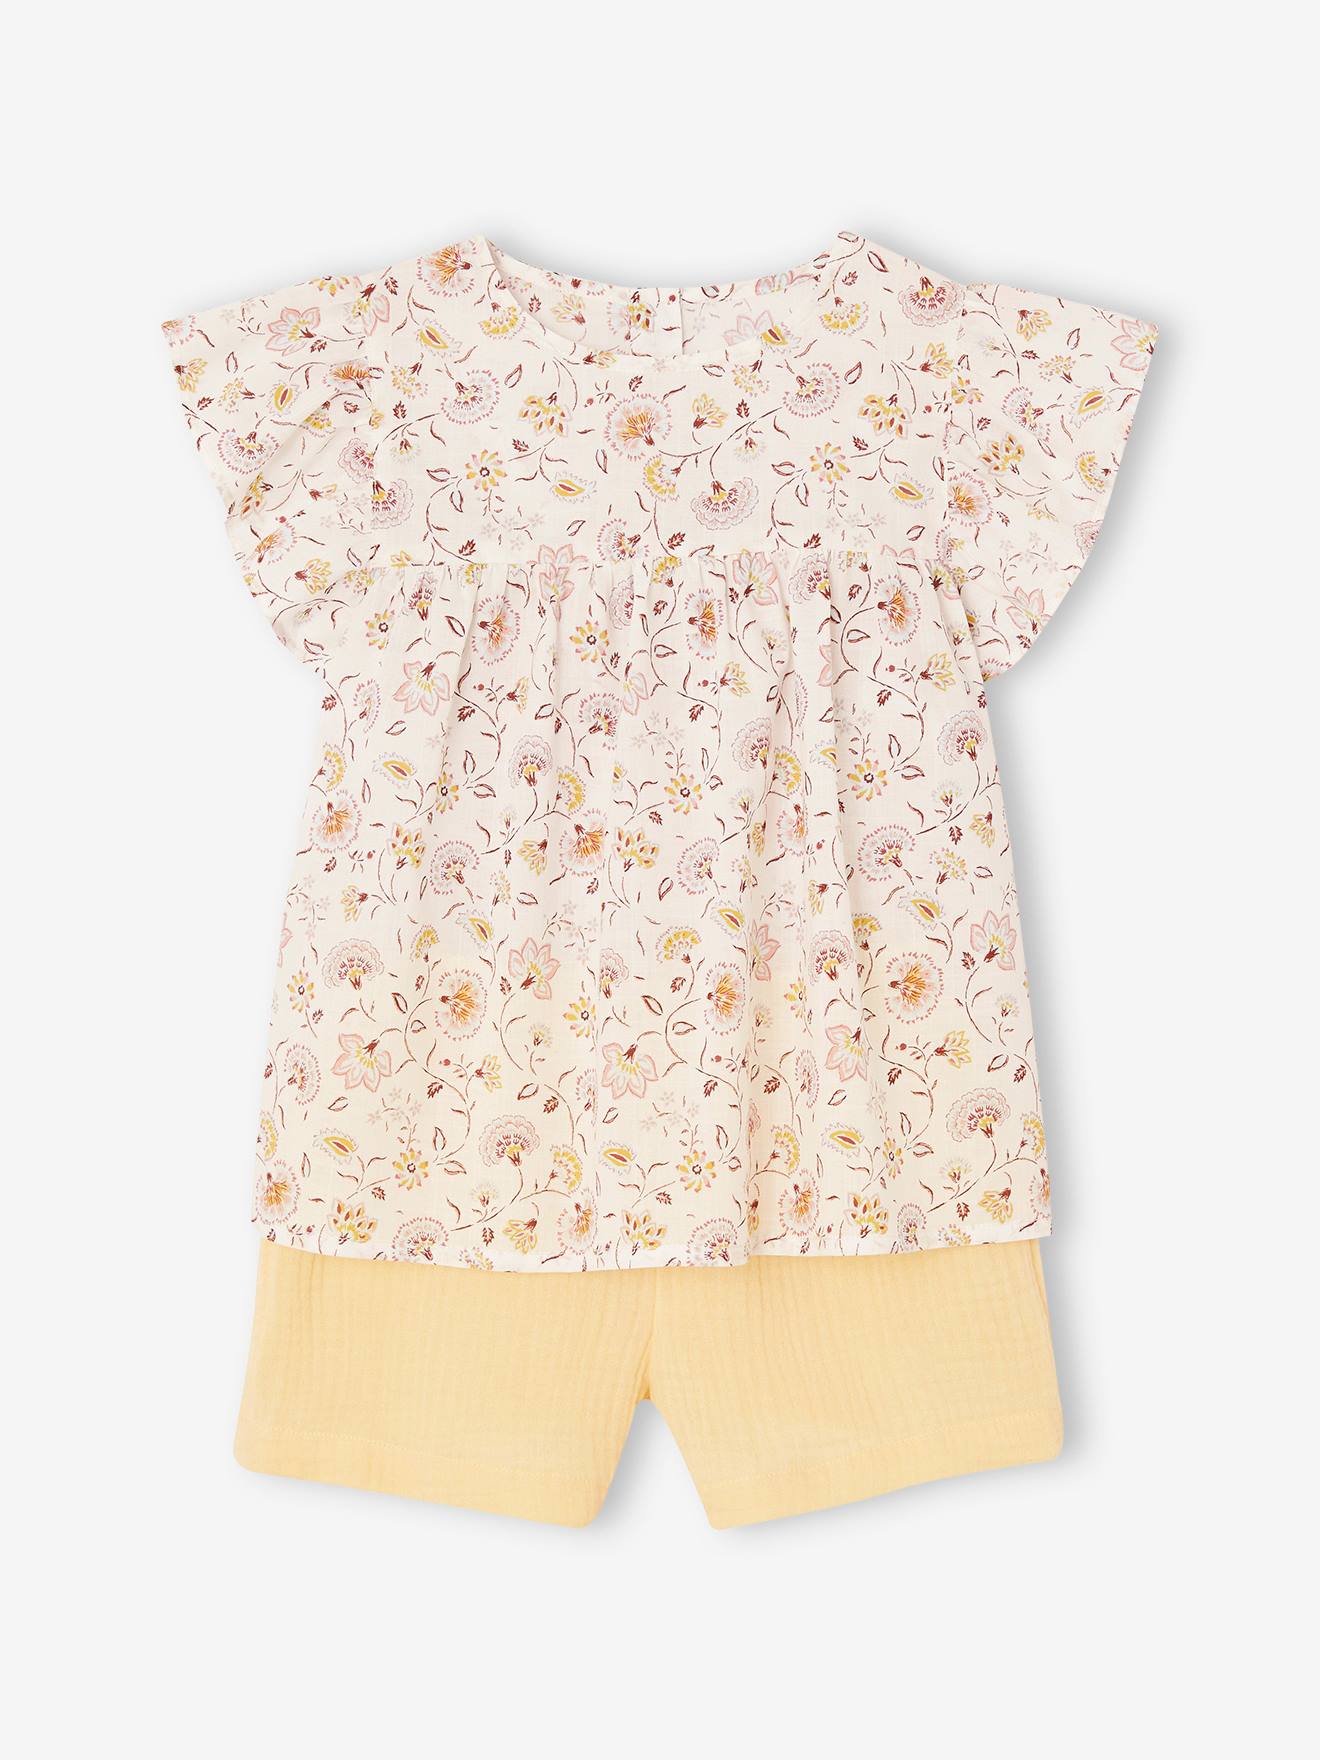 Blouse with Flowers & Cotton Gauze Shorts Combo for Girls pastel yellow